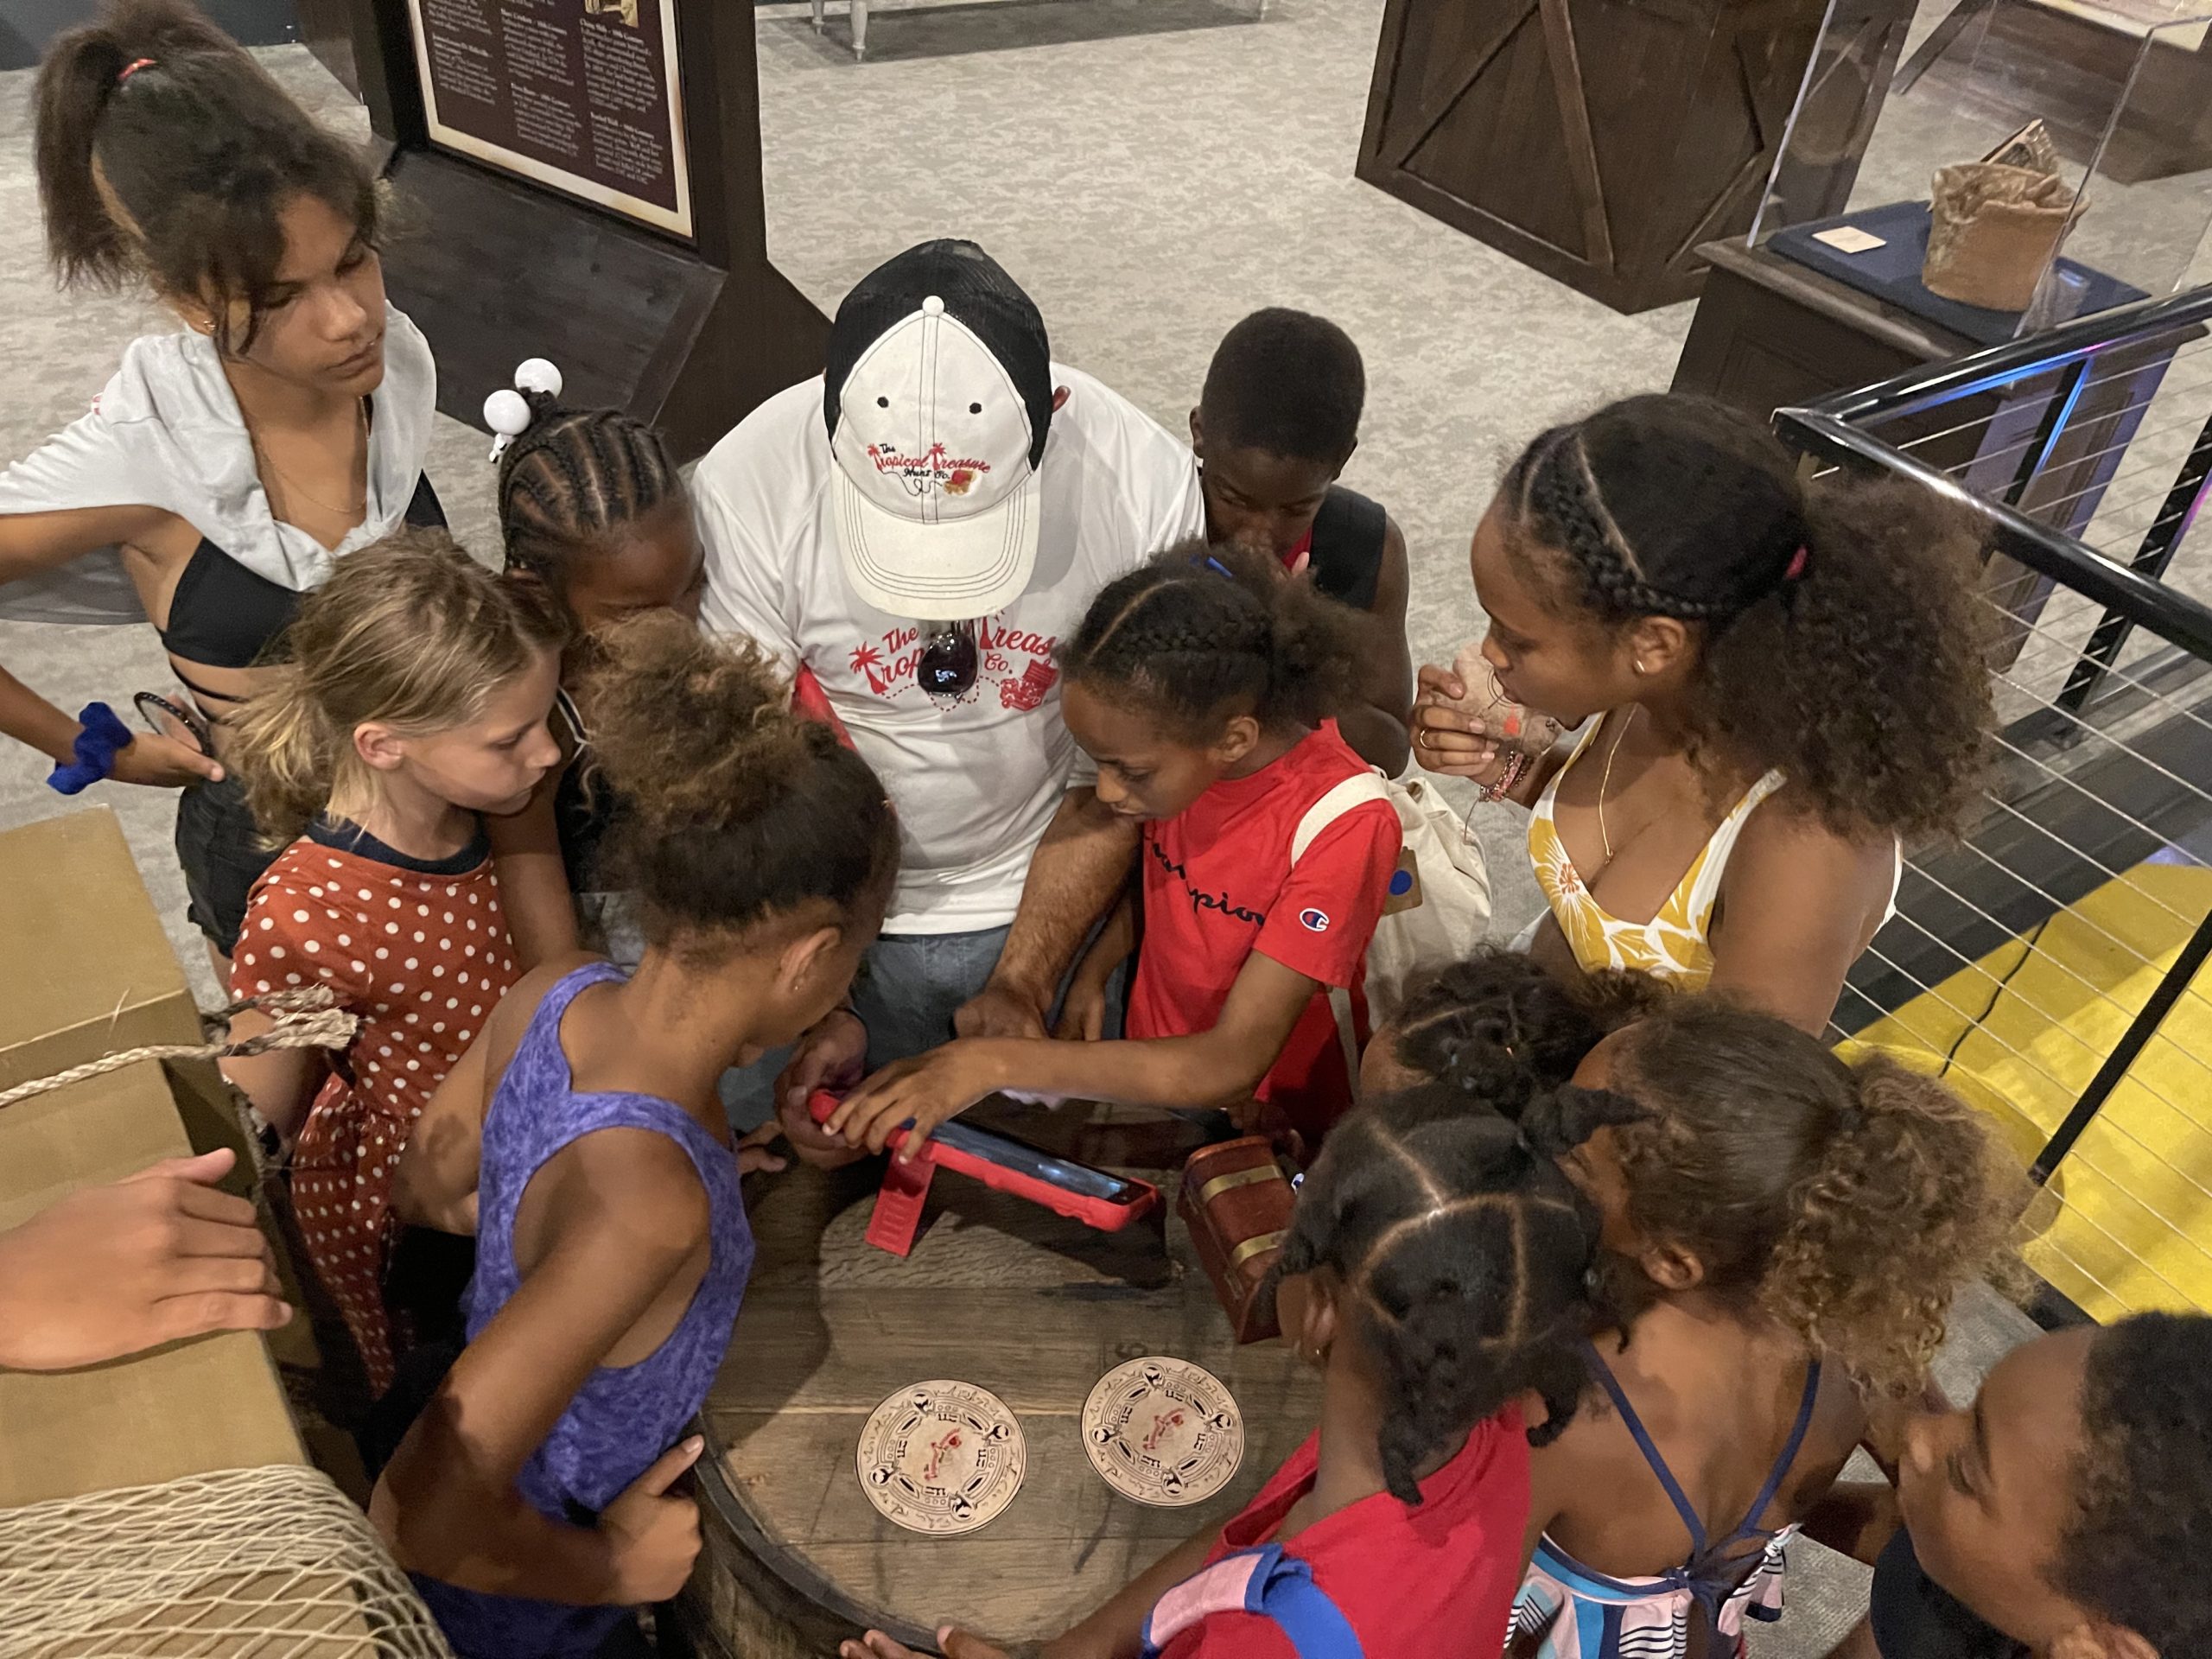 A group of children stands around a barrel with an iPad on top. A man stands in the midst helping the children use the iPad.